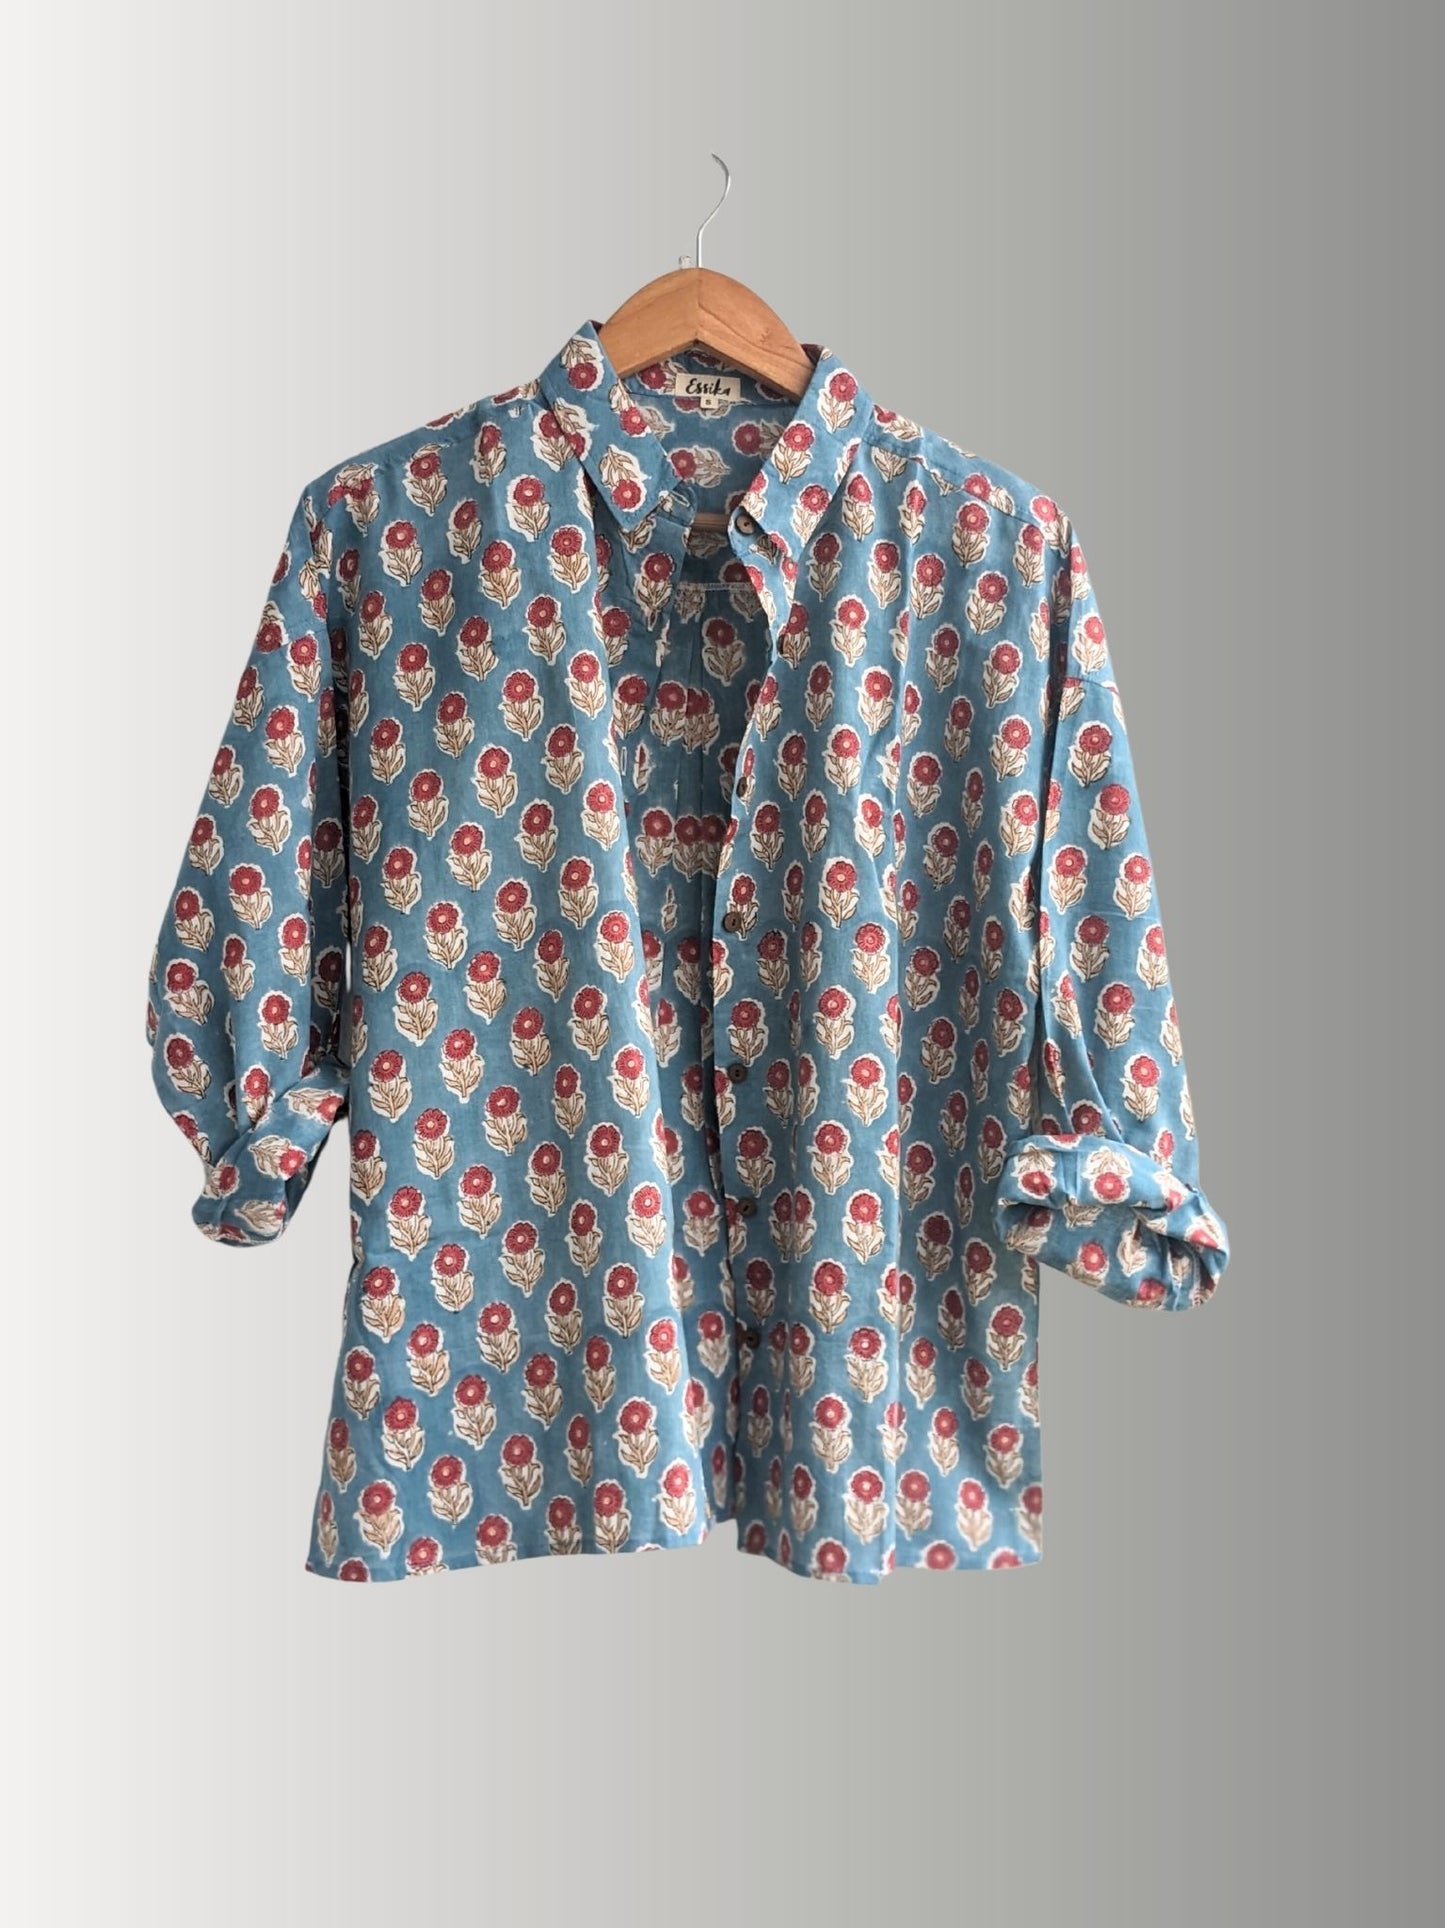 Women's Cotton full sleeves loose fitting, Casual wear shirt, Teal with Red Flower Print  in 4 sizes (S, M, L, XL)